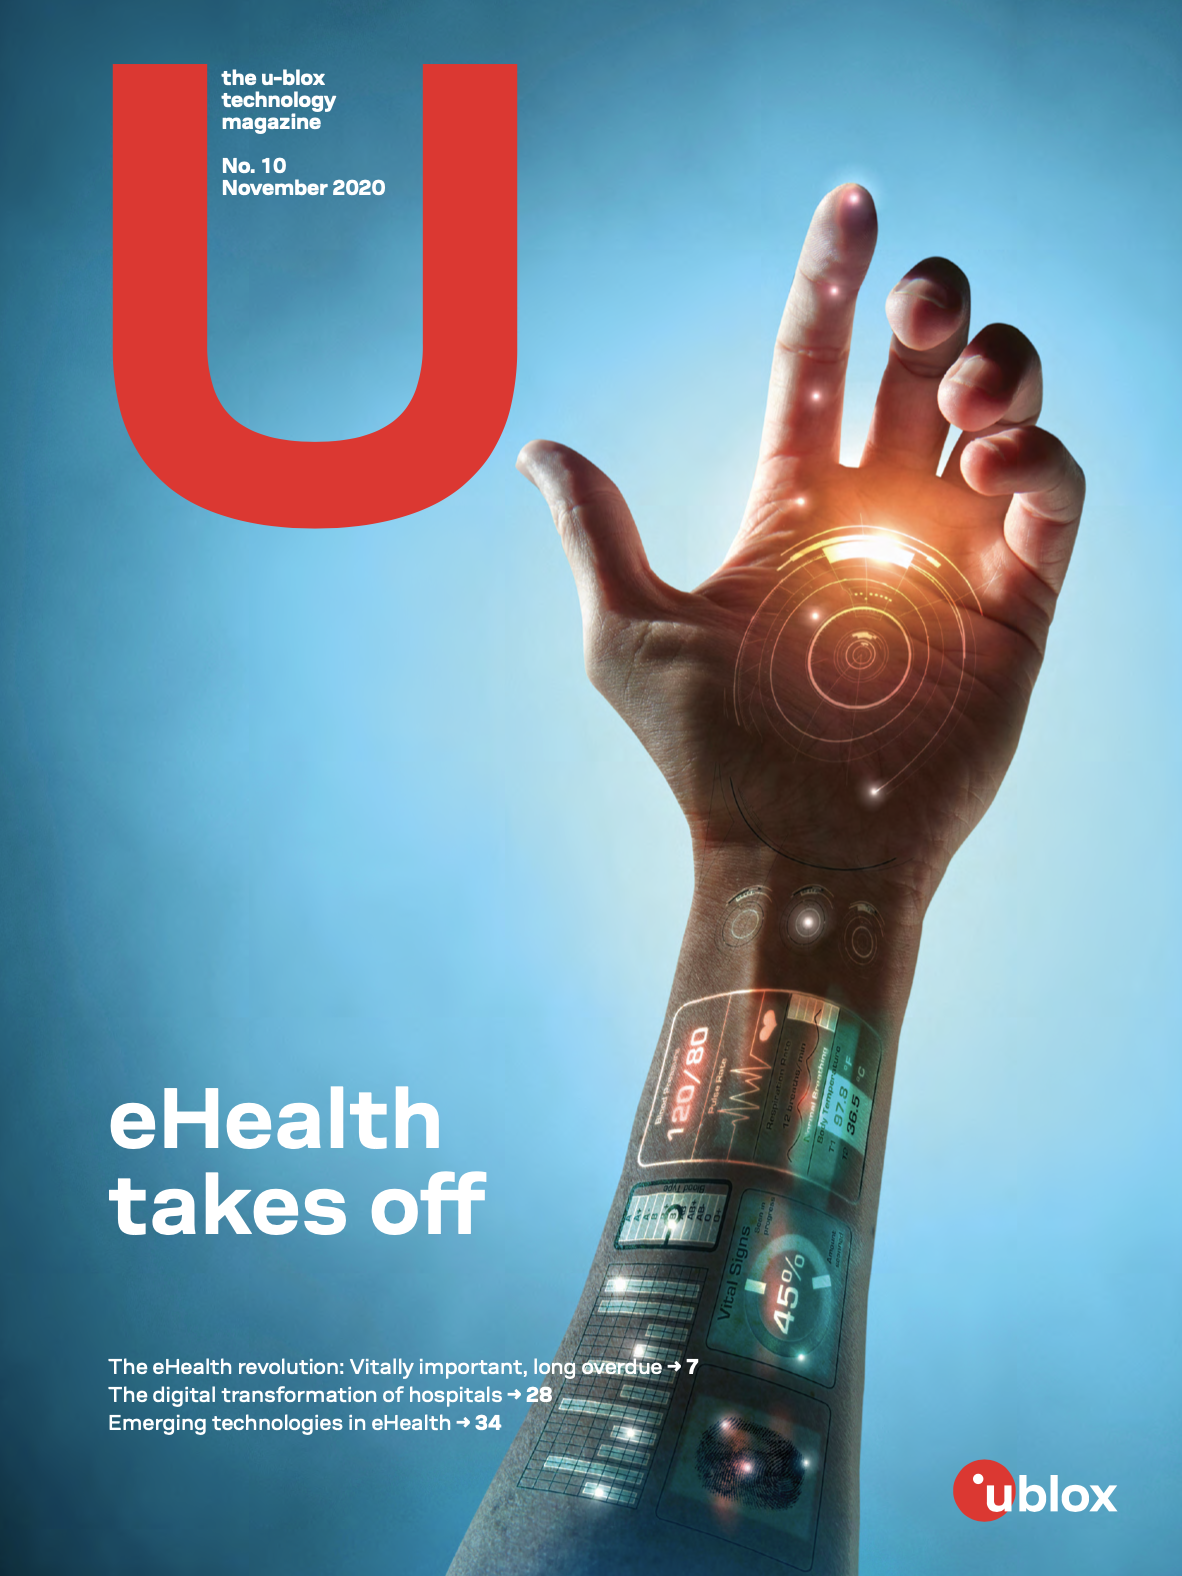 The cover of the eHalth takes off Magazine